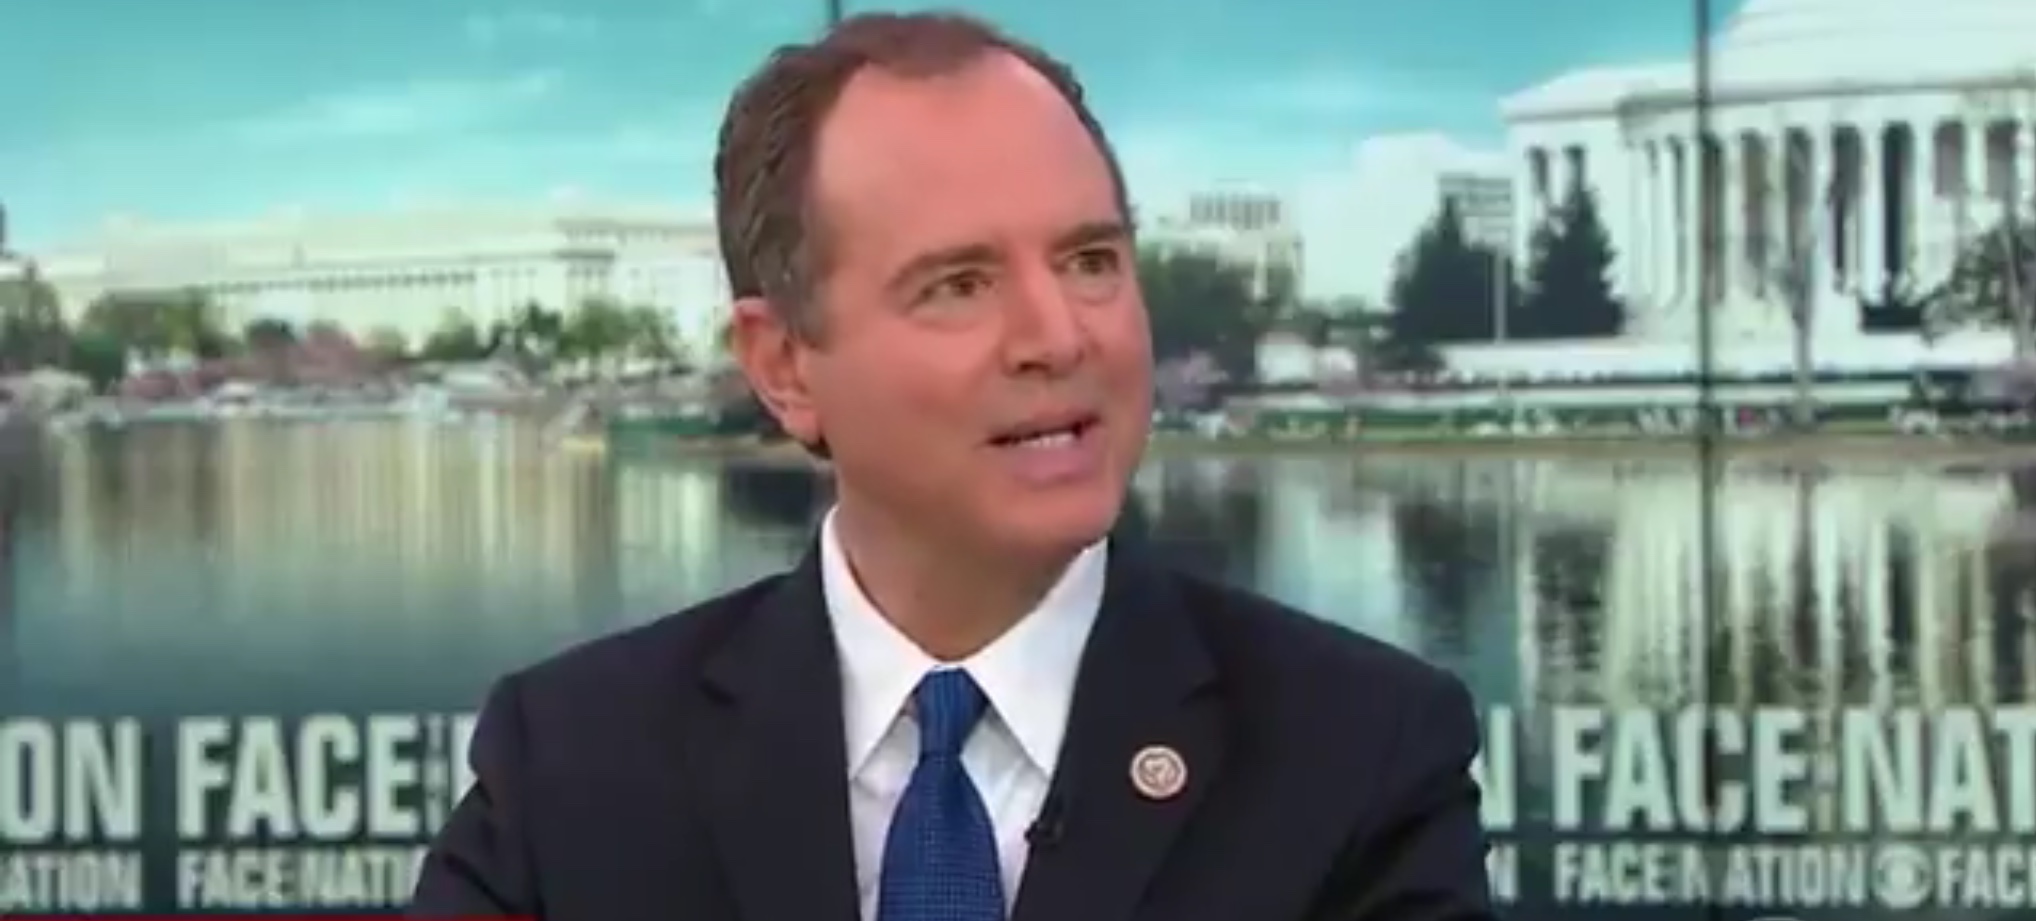 House Intelligence Committee Chairman Adam Schiff appears on CBS News’ “Face the Nation” to discuss impeachment, May 19, 2019. CBS News screenshot via Twitter